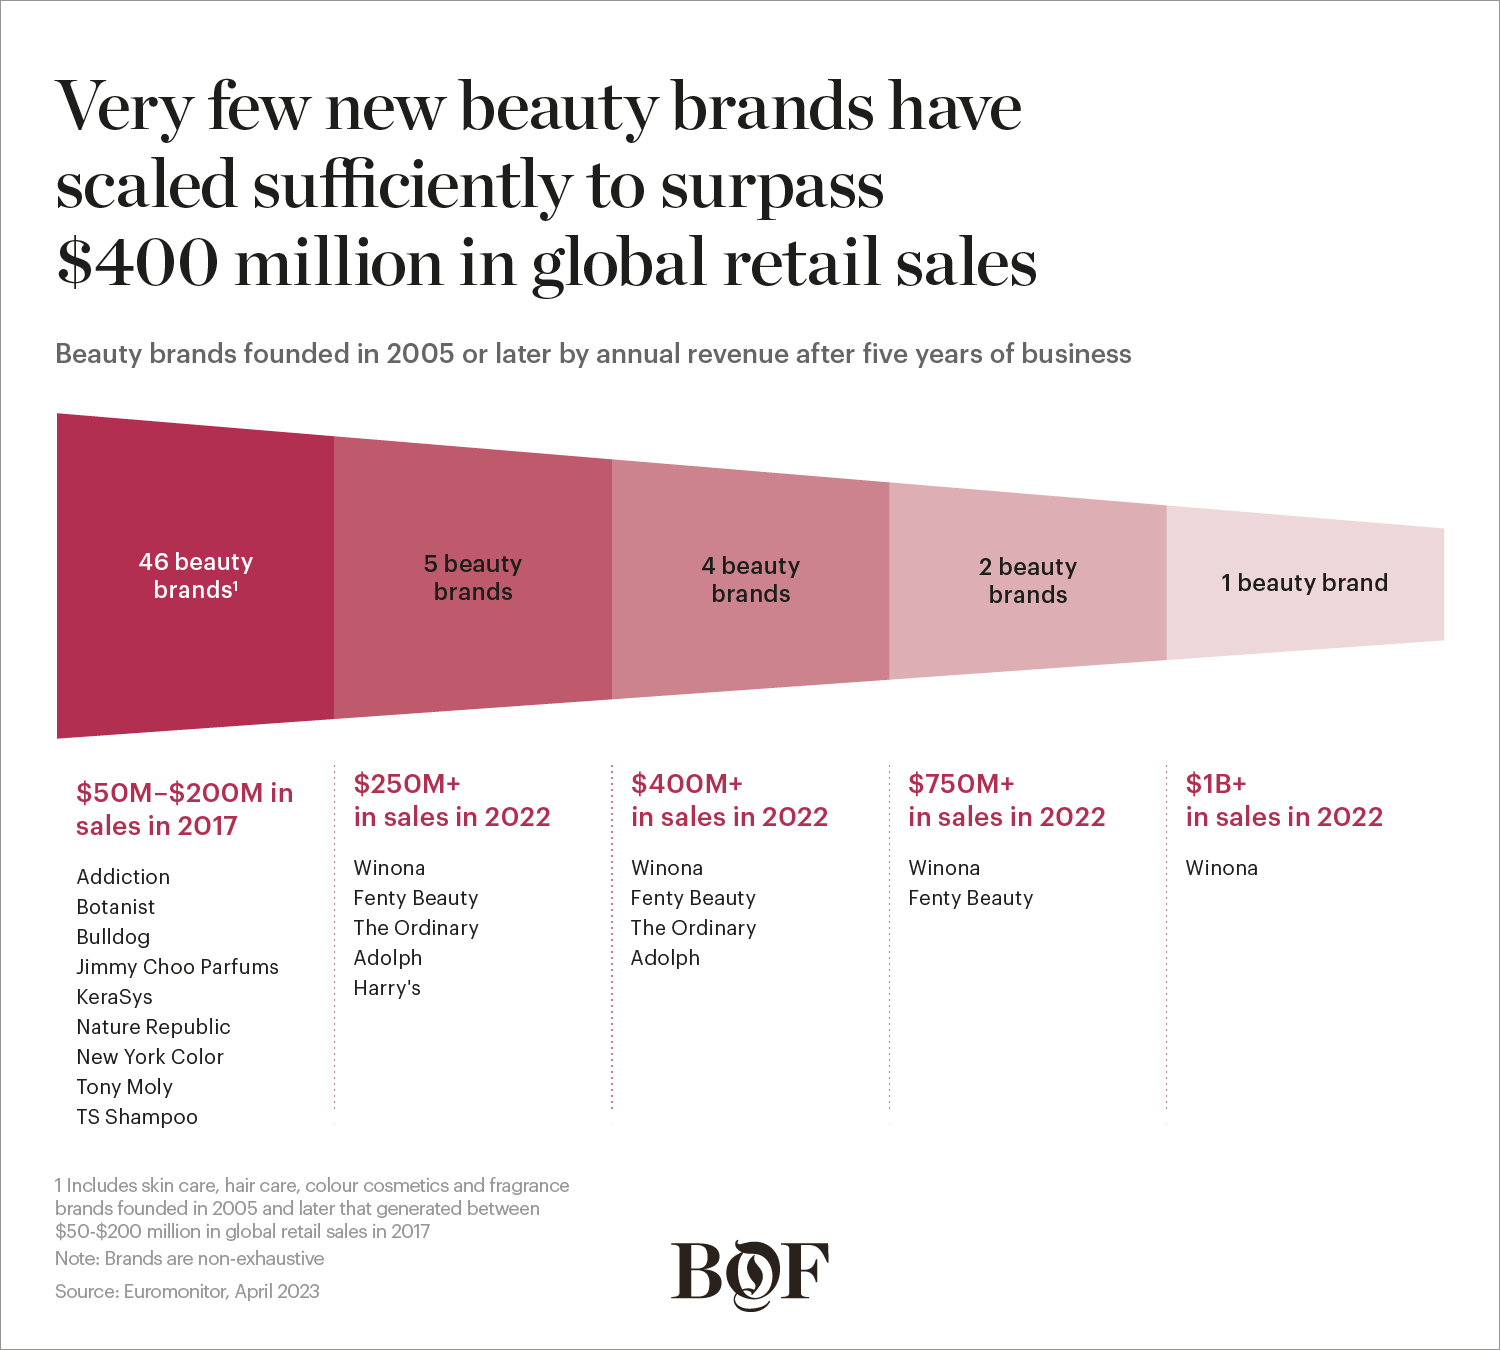 FullBeauty Brands expands inclusive sizing portfolio with CUUP